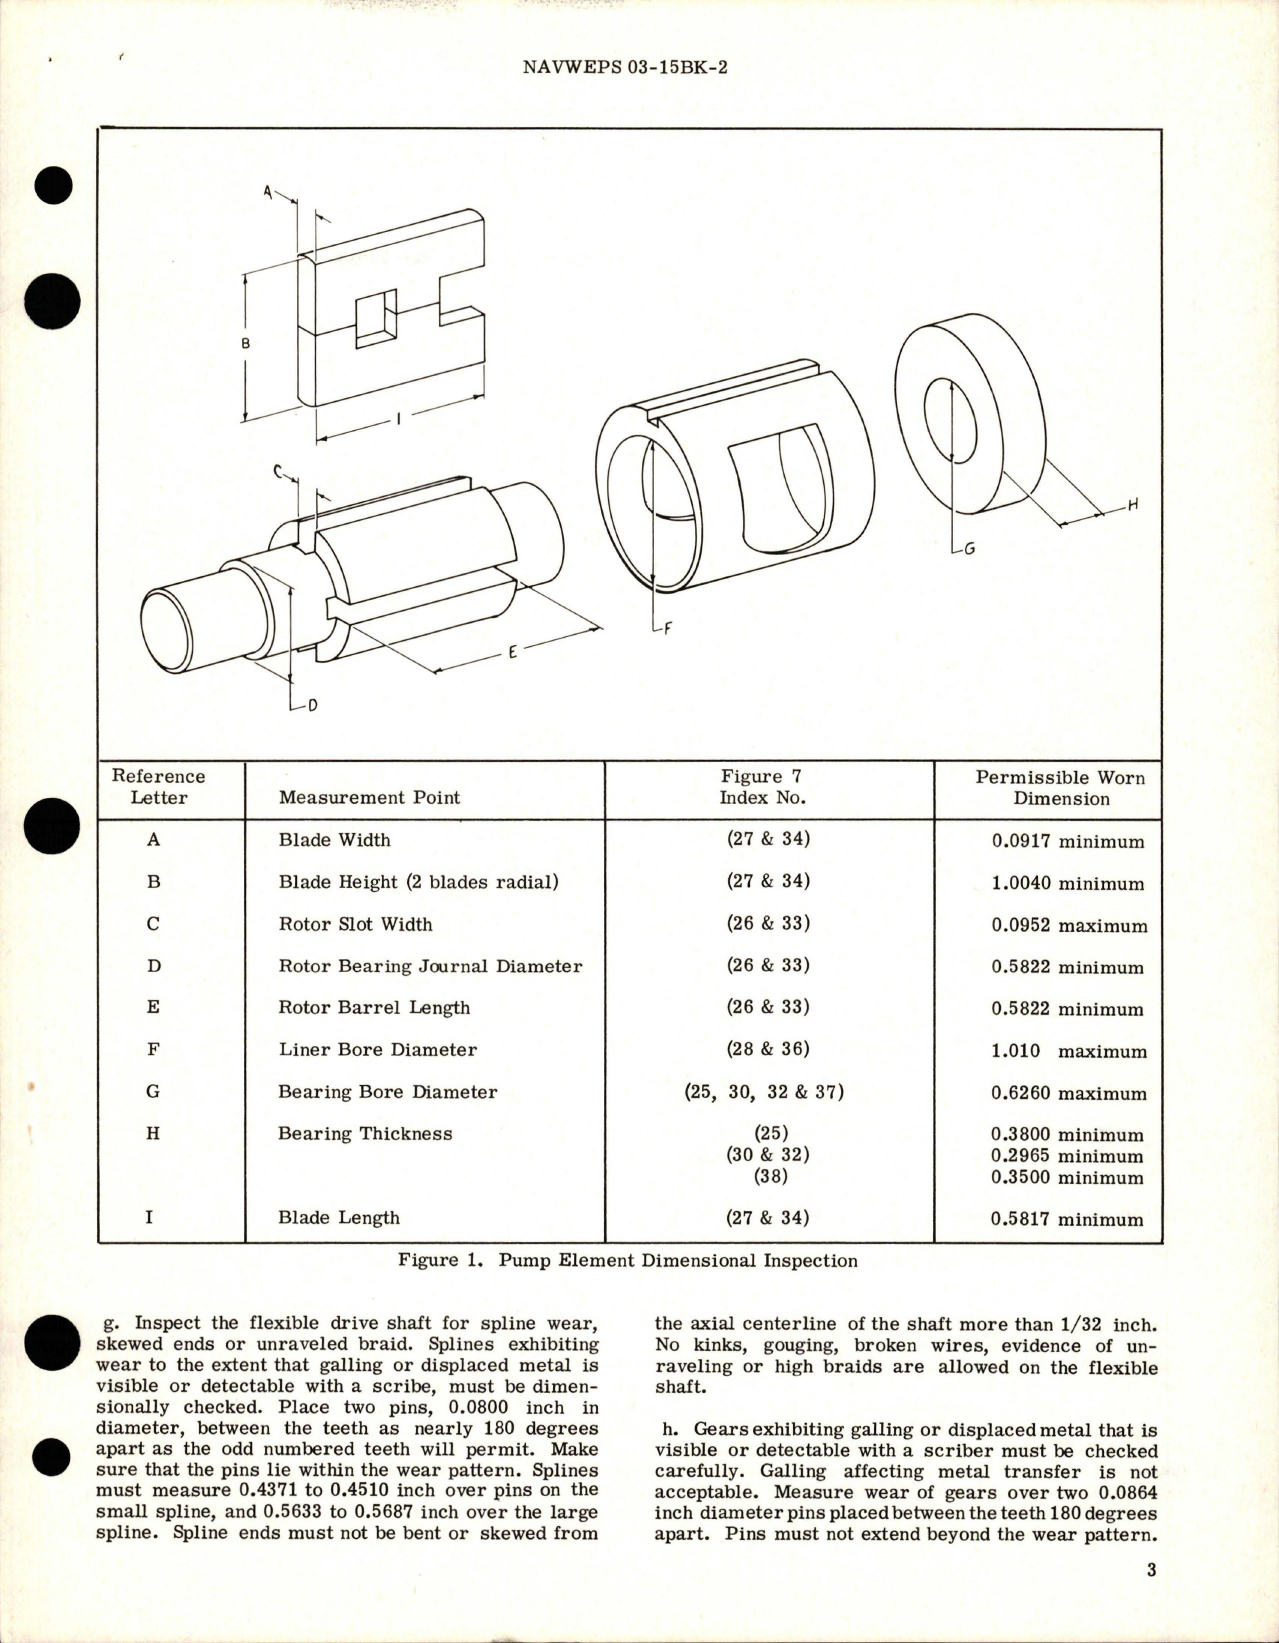 Sample page 5 from AirCorps Library document: Overhaul Instructions with Parts for Power Driven Rotary Pump - Model RR17800,